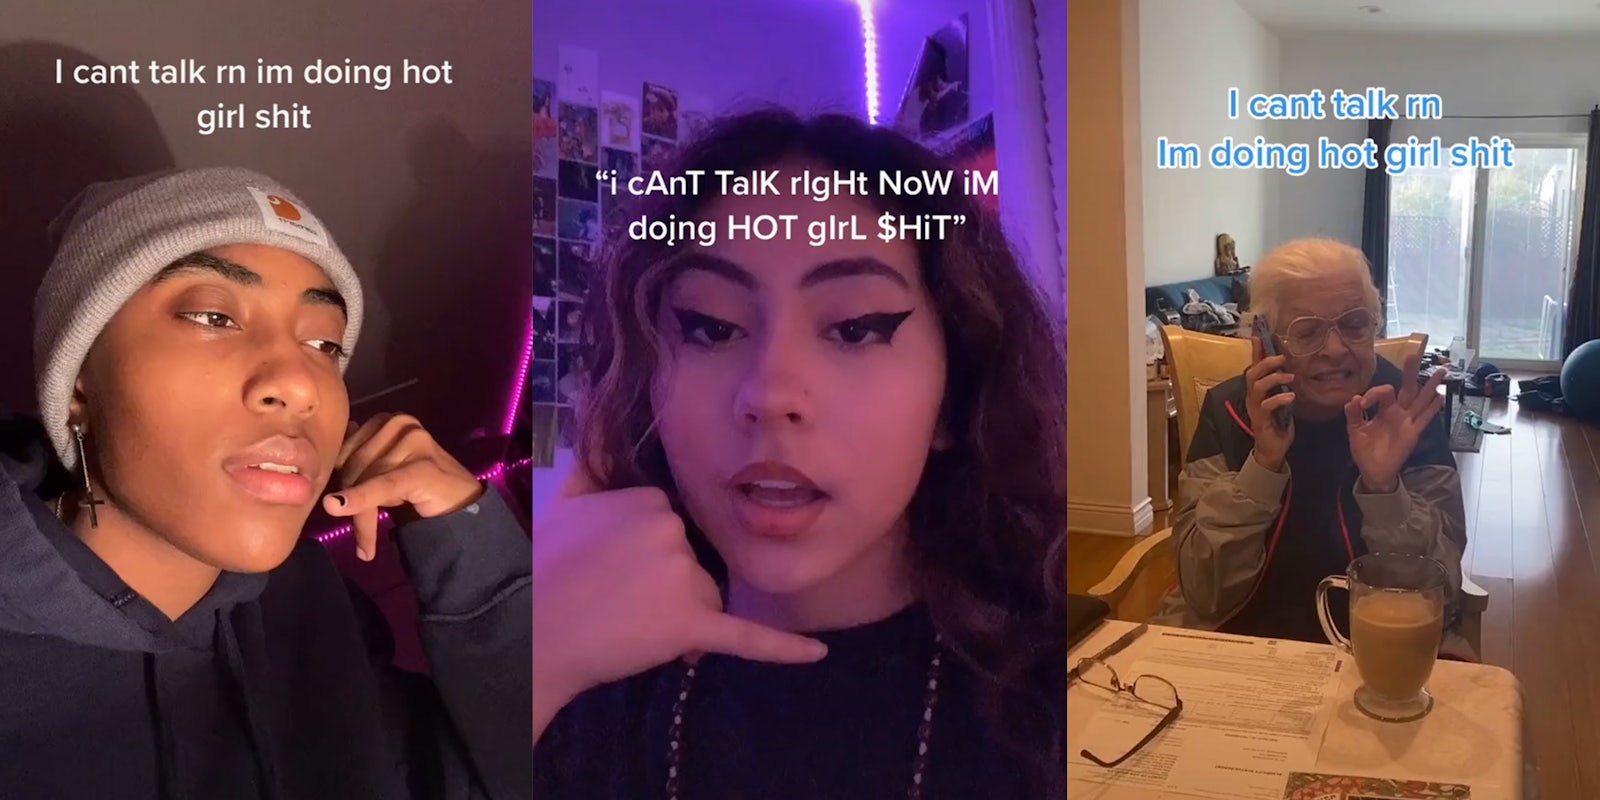 women on phone saying 'i can't talk right now i'm doing hot girl shit'